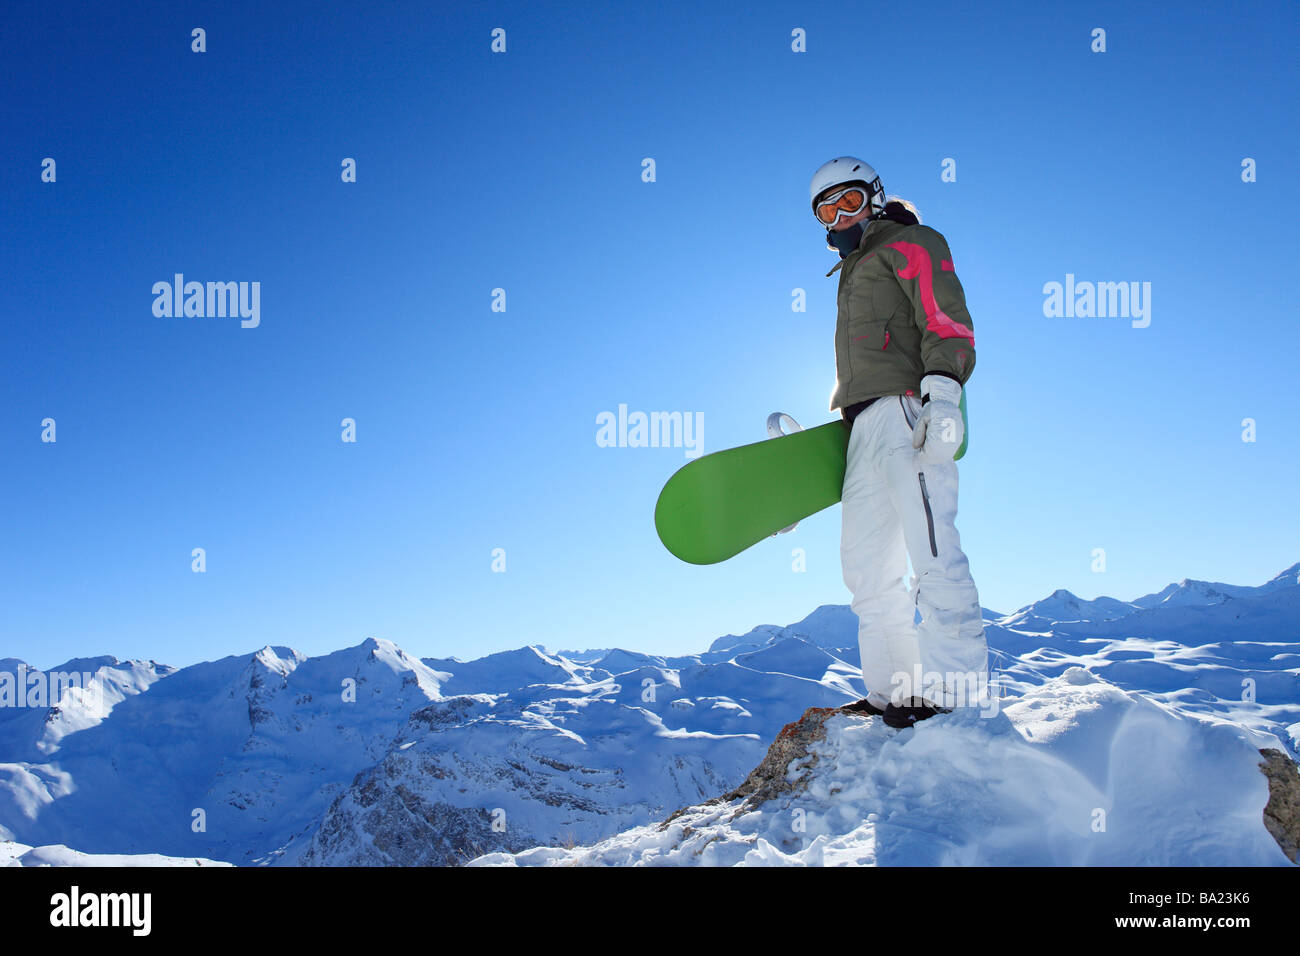 A snowboarder stands proudly on the summit of a mountain in the ski resort of Tignes, Espace Killy, France Stock Photo